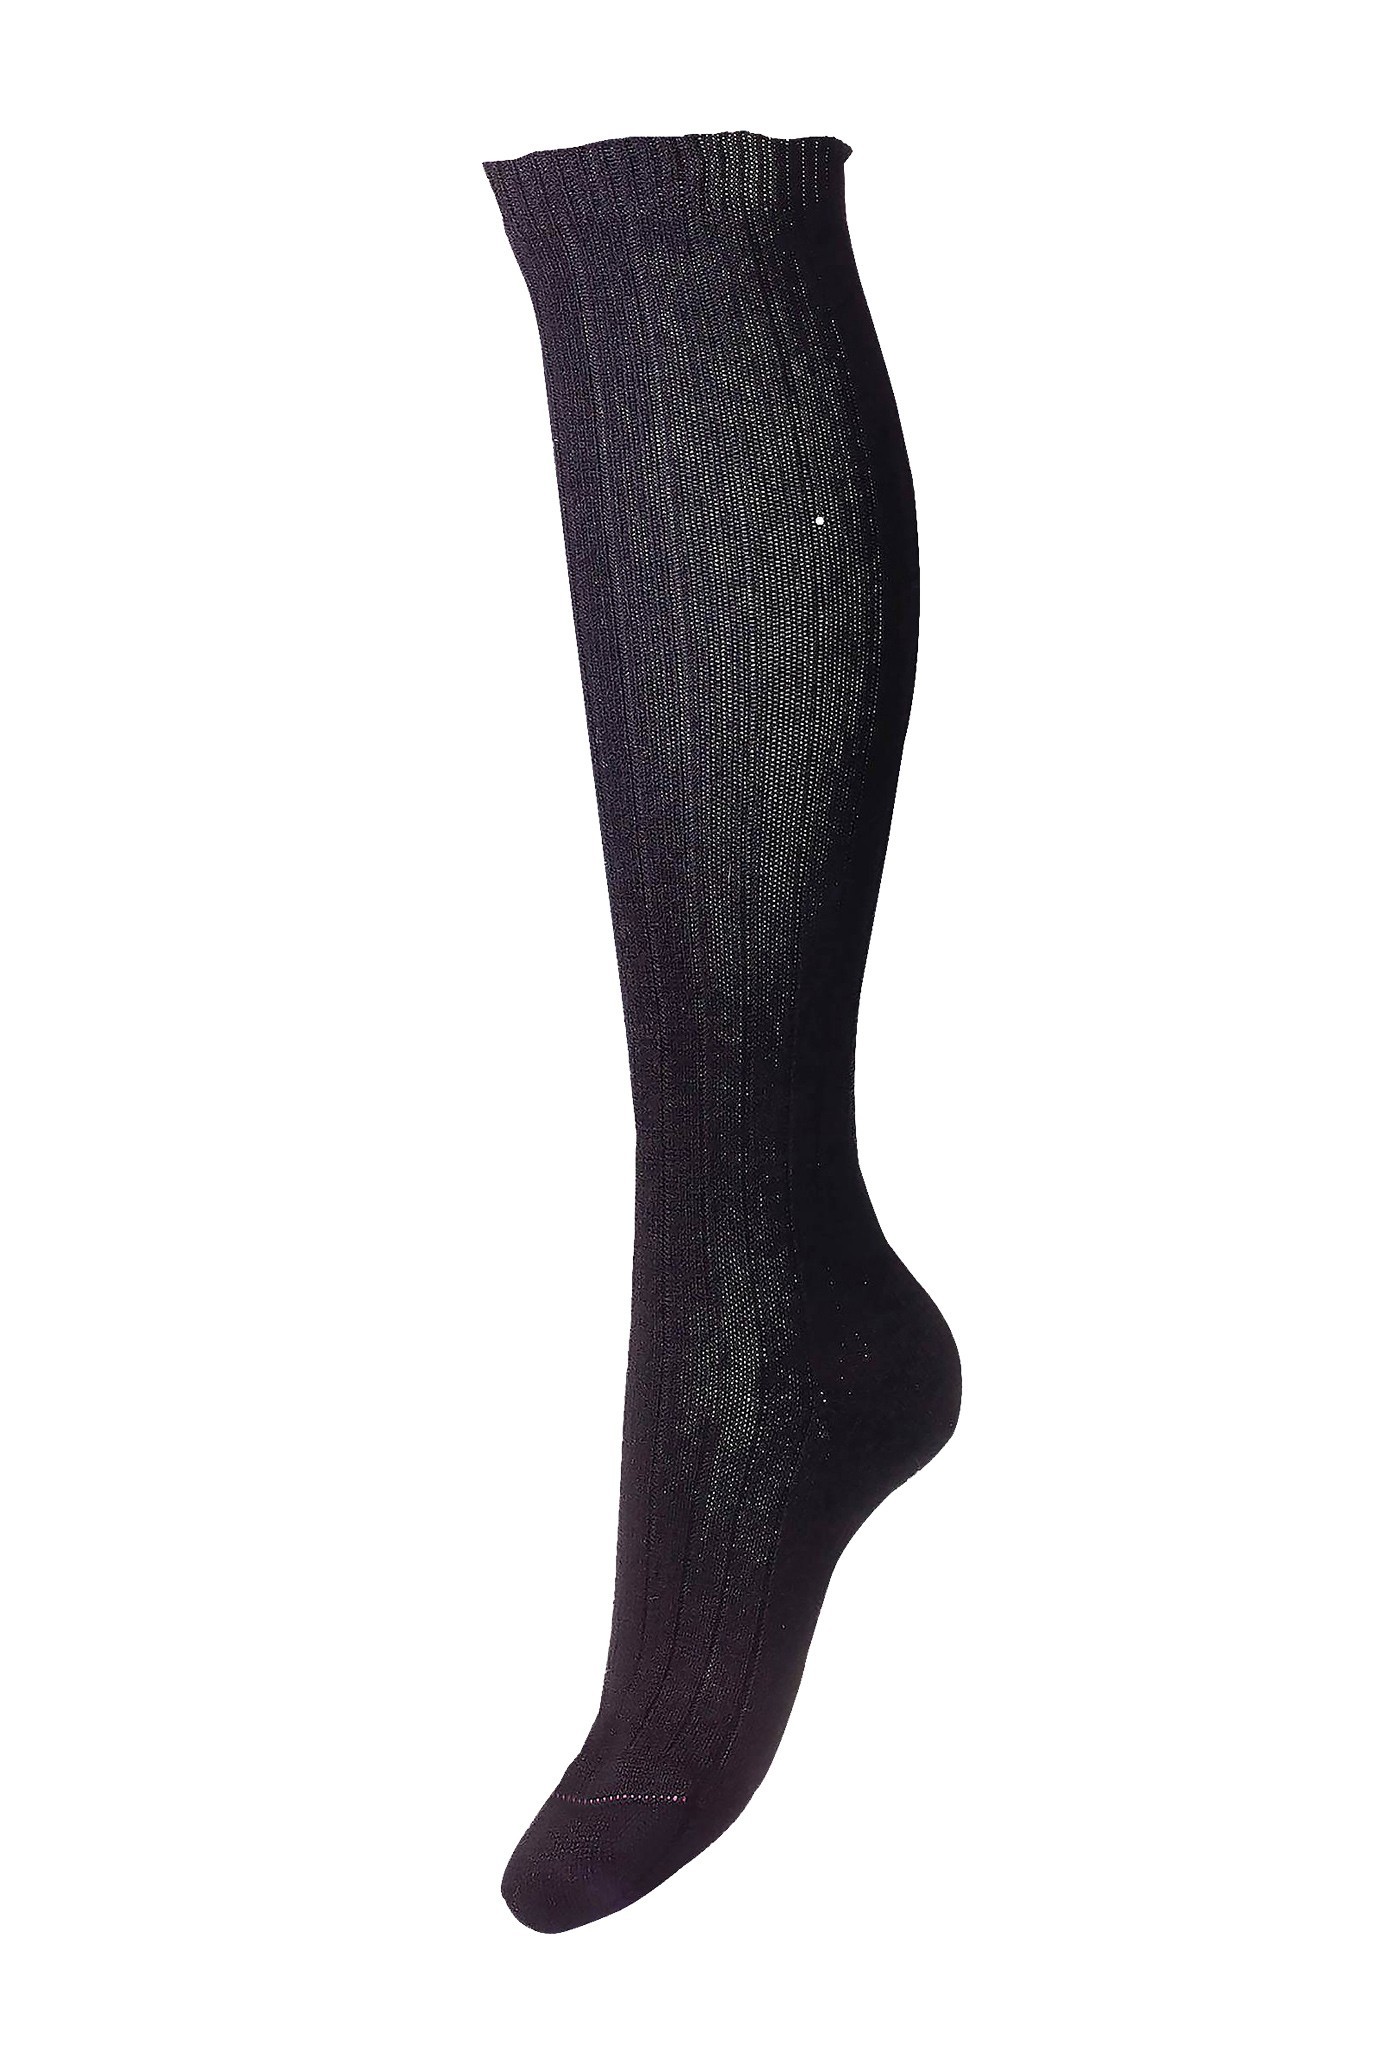 Pantherella Women's Tabitha Knee High Cashmere Ribbed Socks in Black